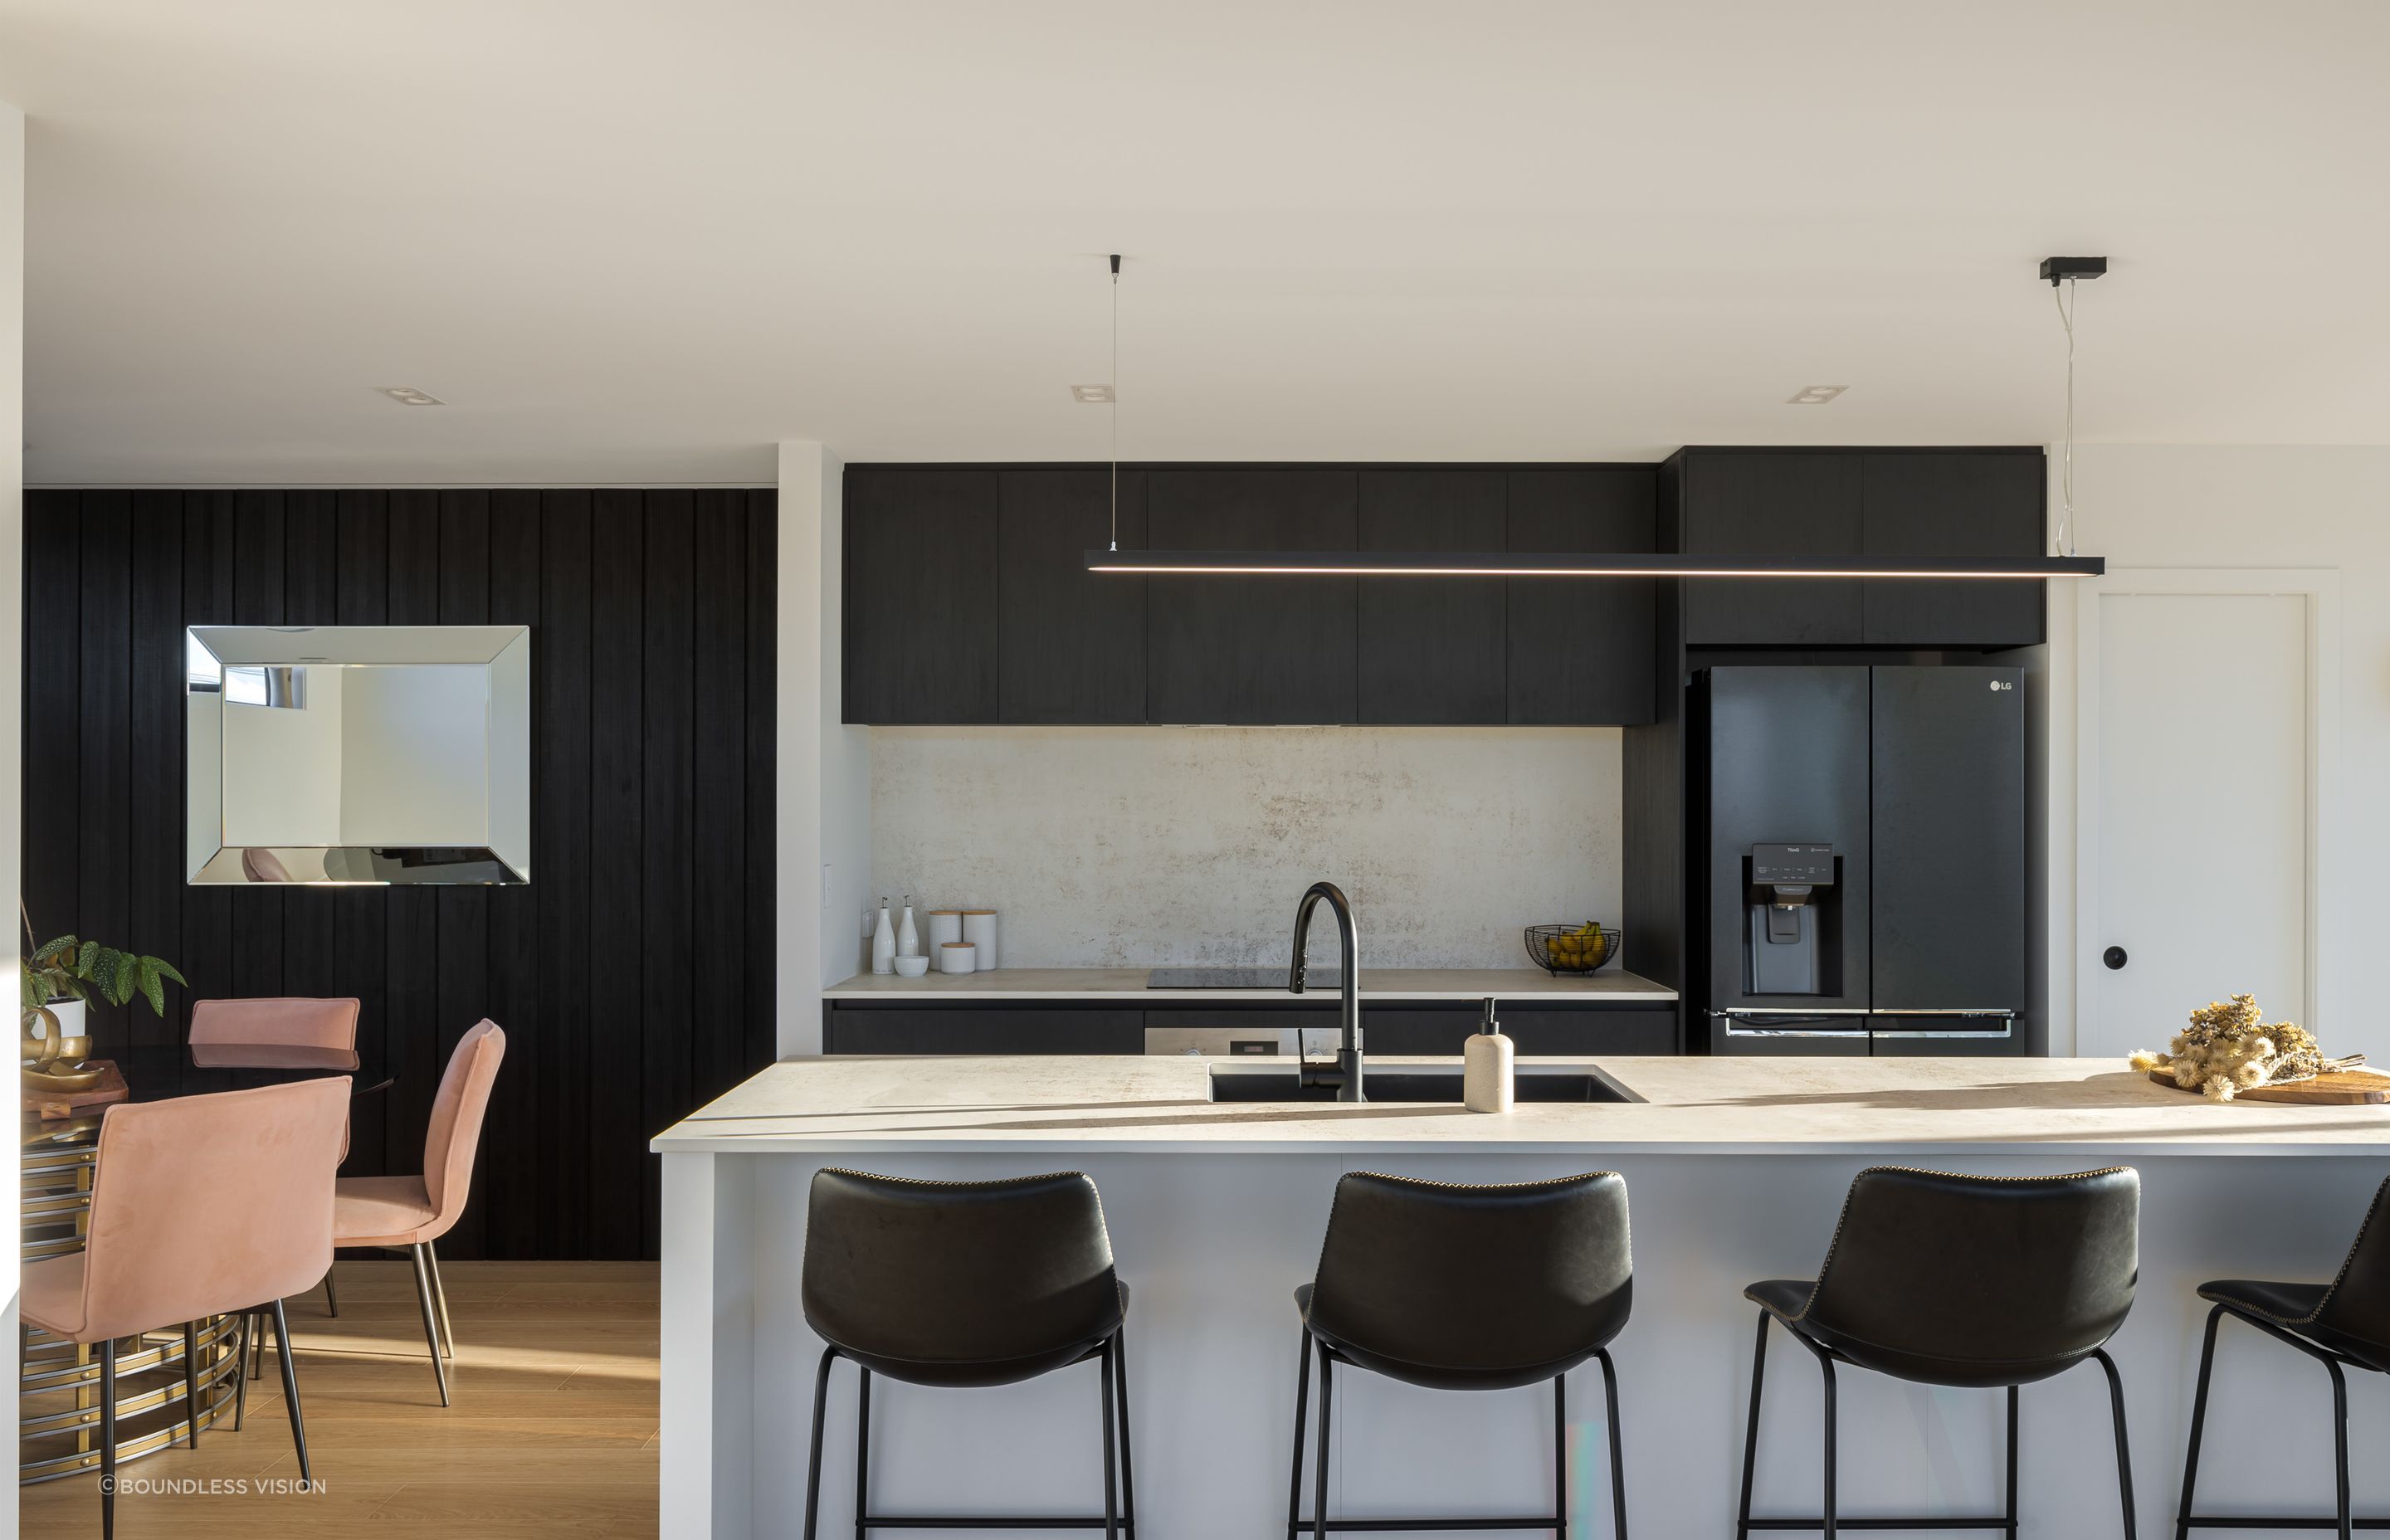 The simplistic palette of the kitchen references the exterior materiality.